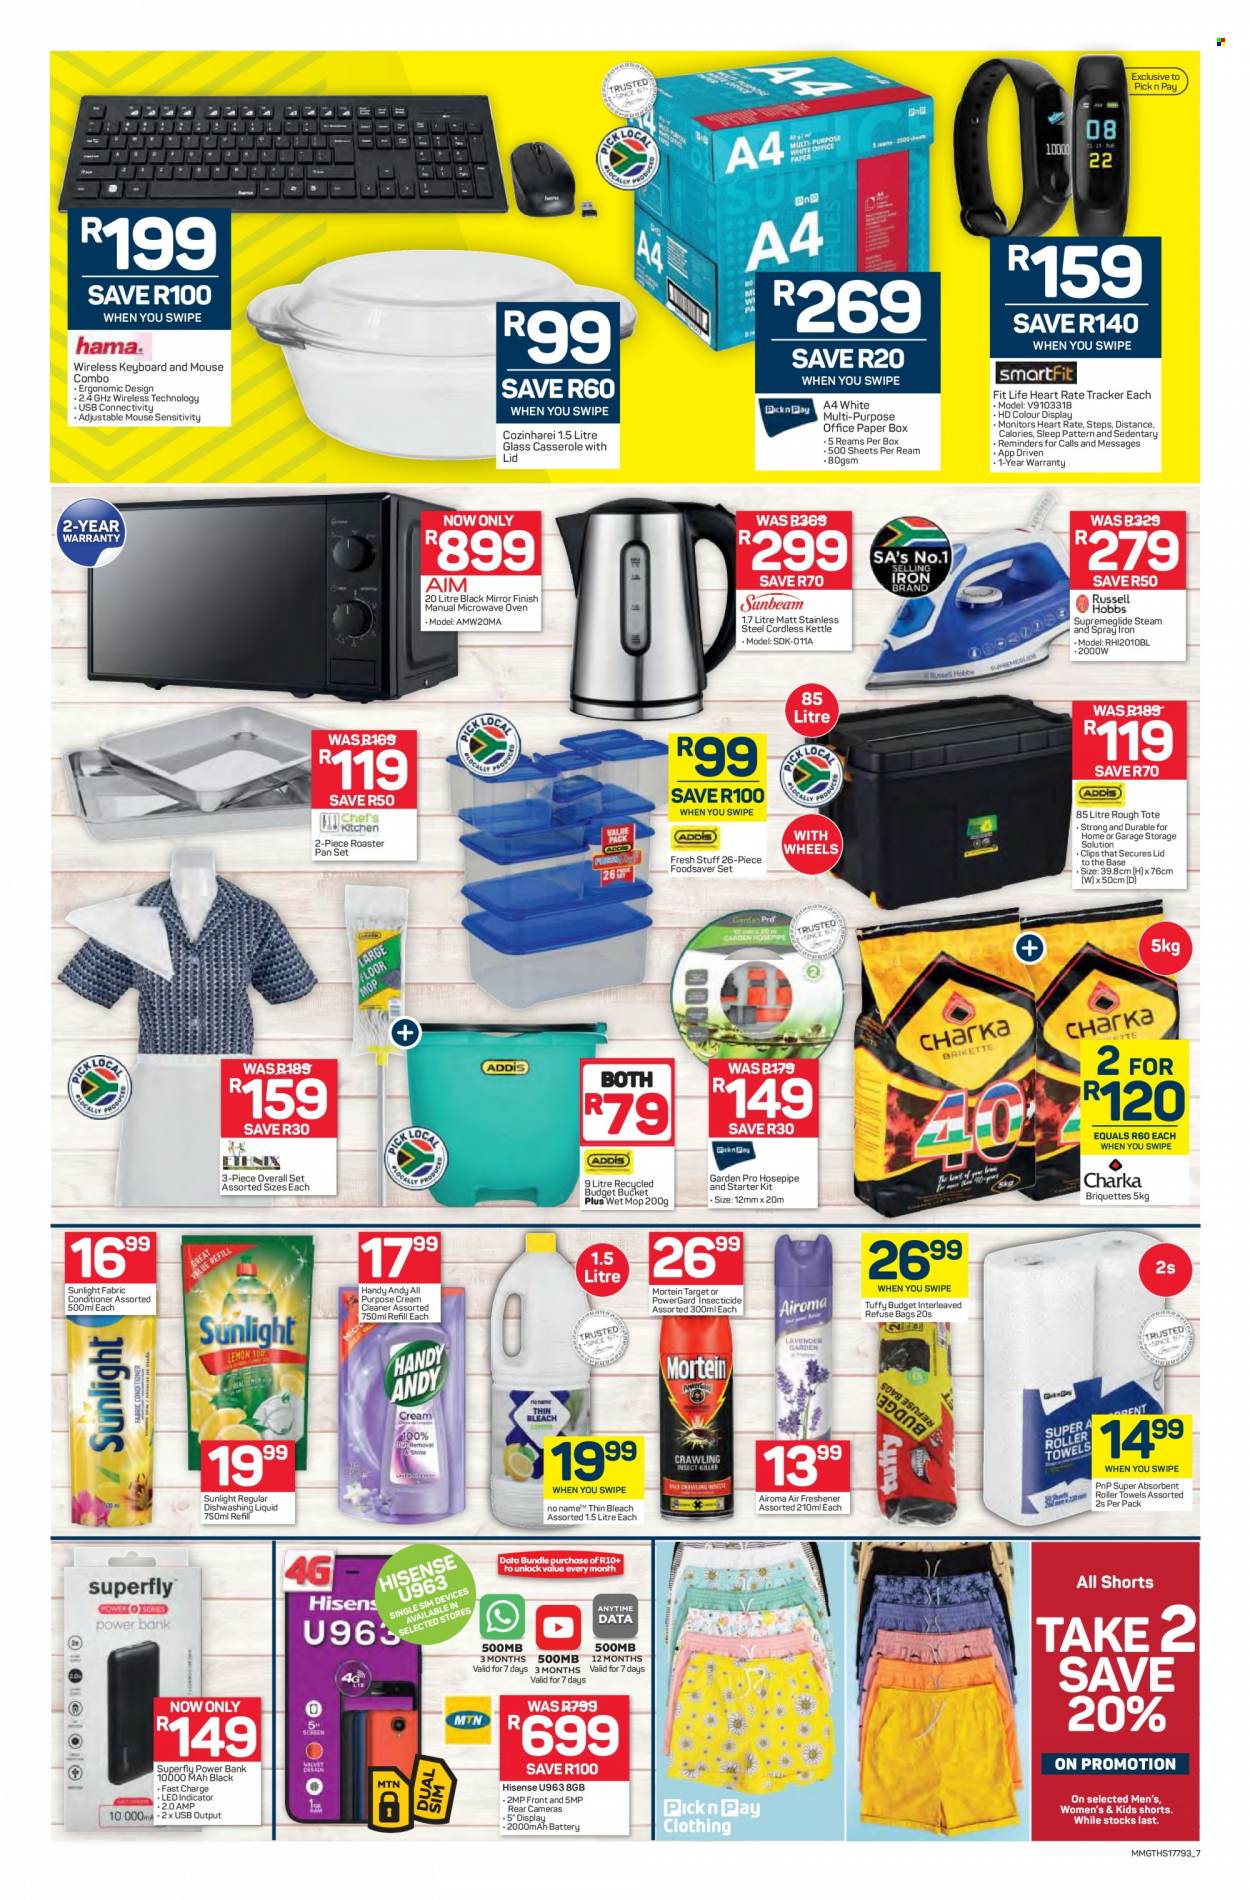 Pick n Pay specials - 09.13.2021 - 09.21.2021. 